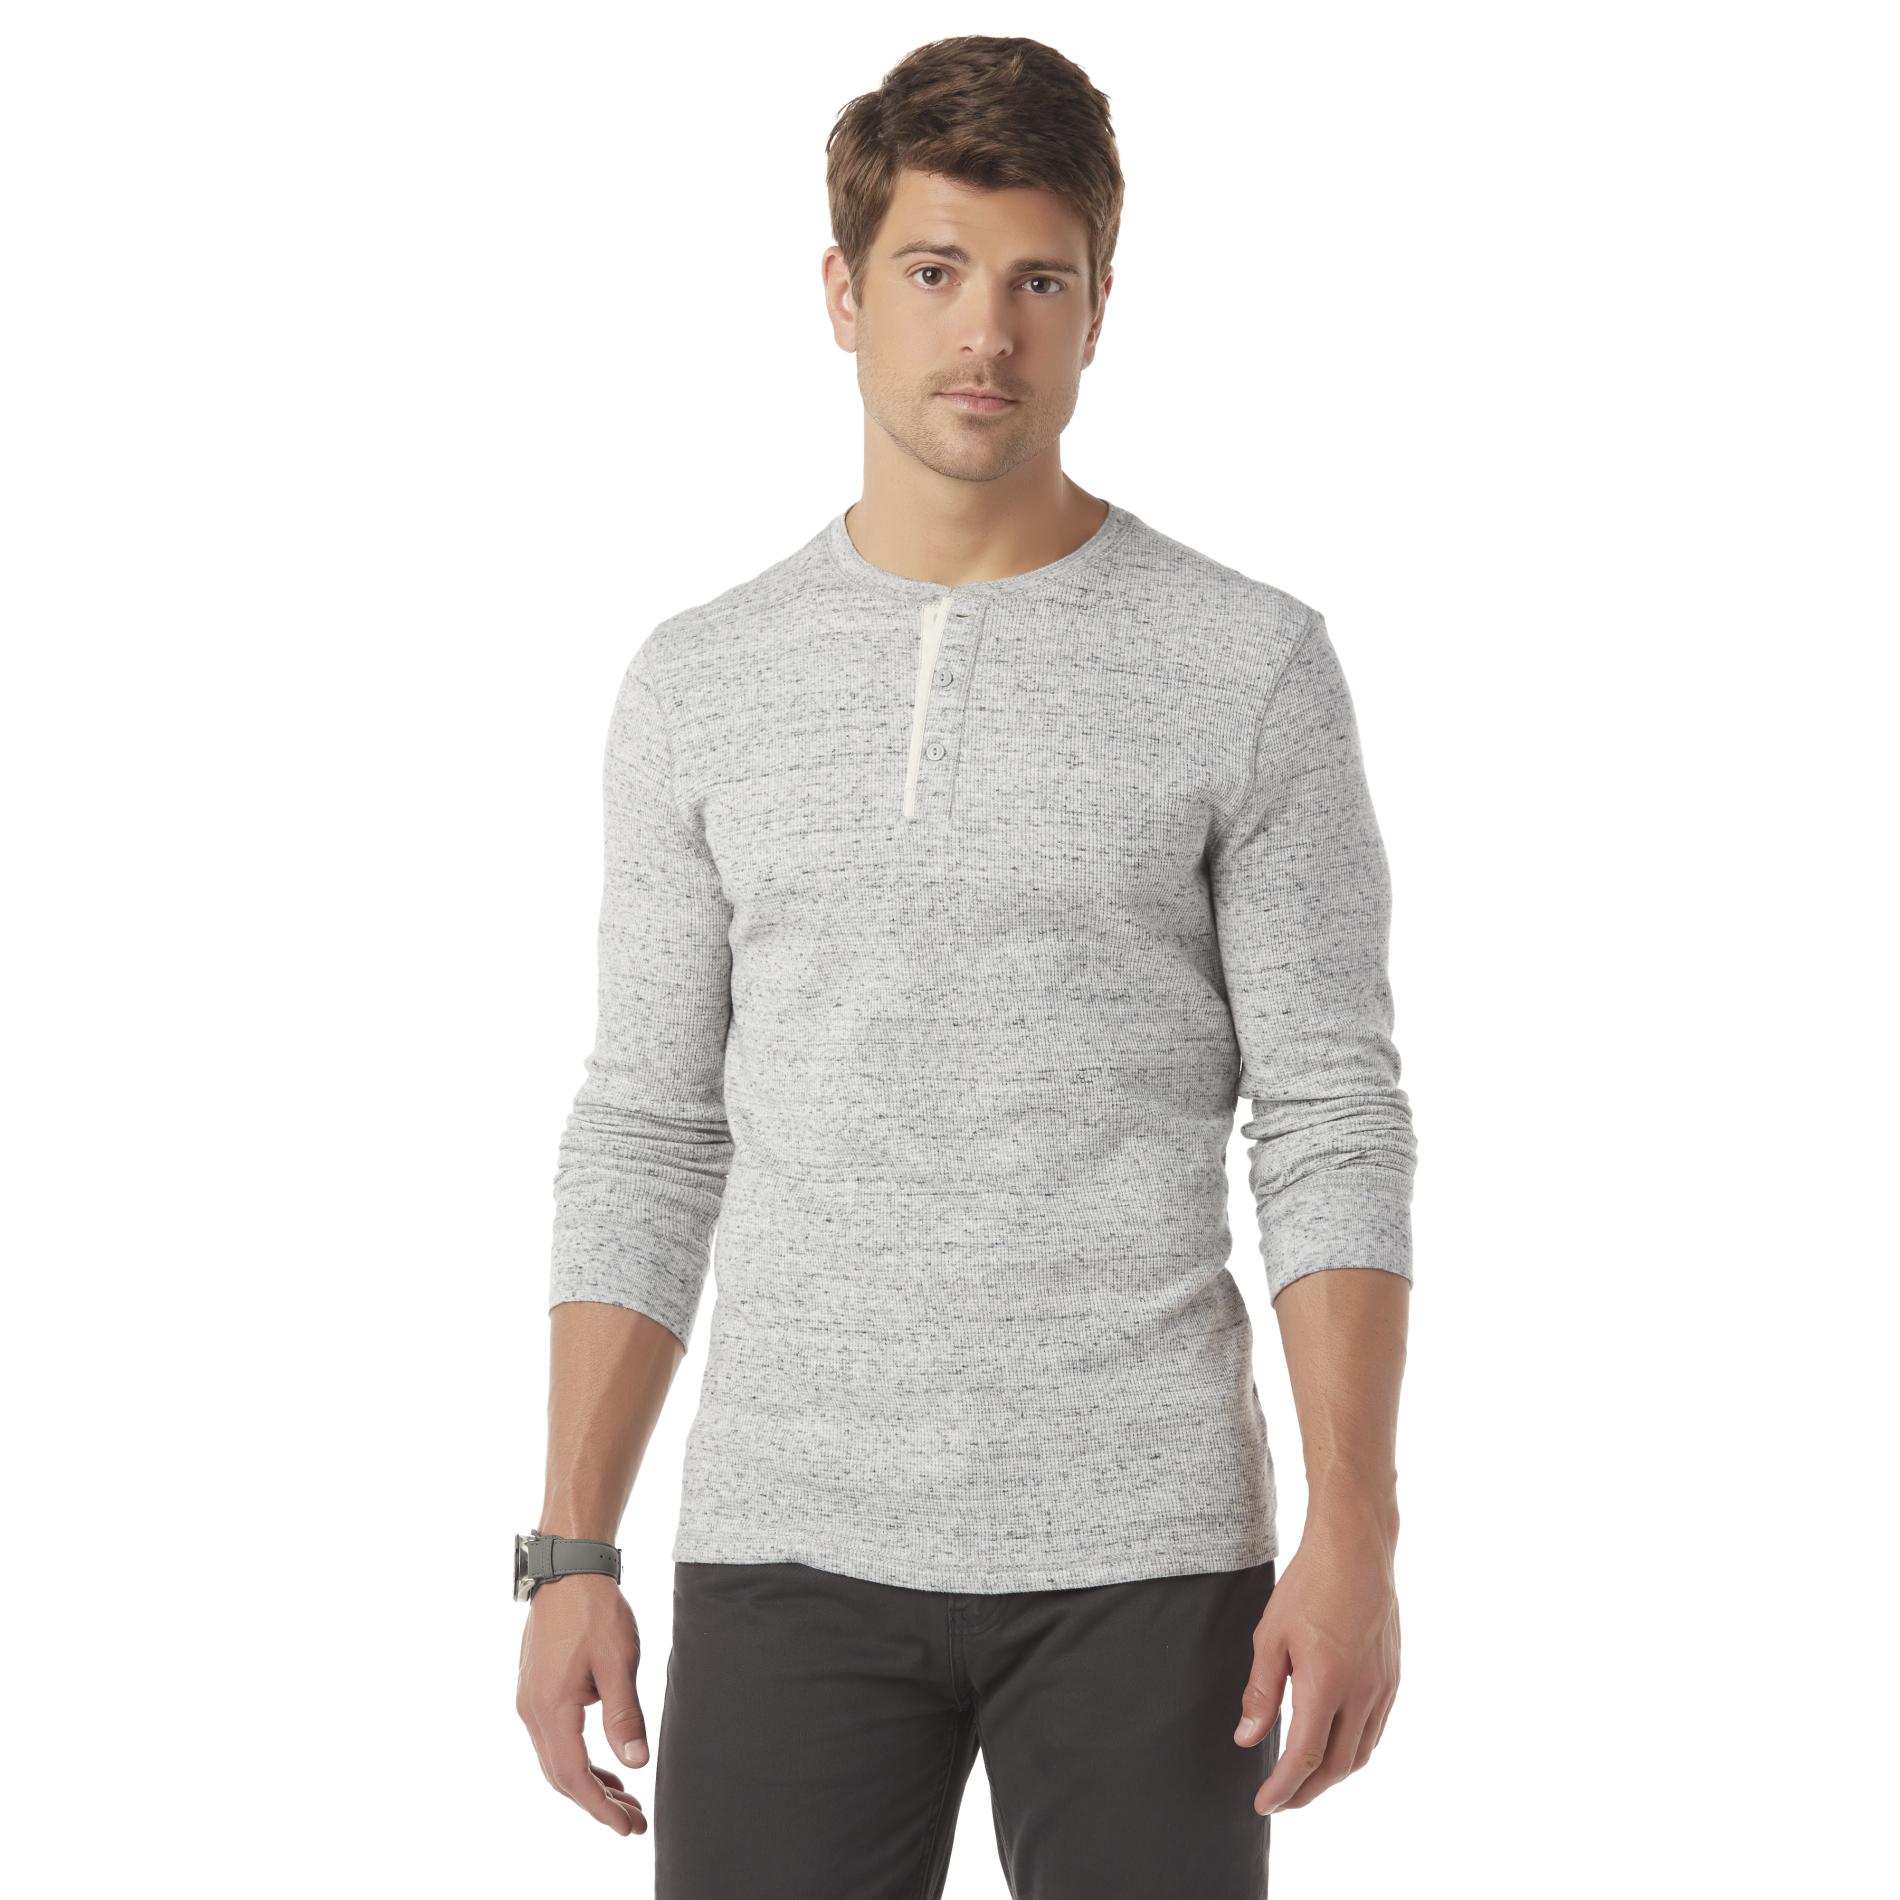 Structure Men's Thermal Henley Shirt